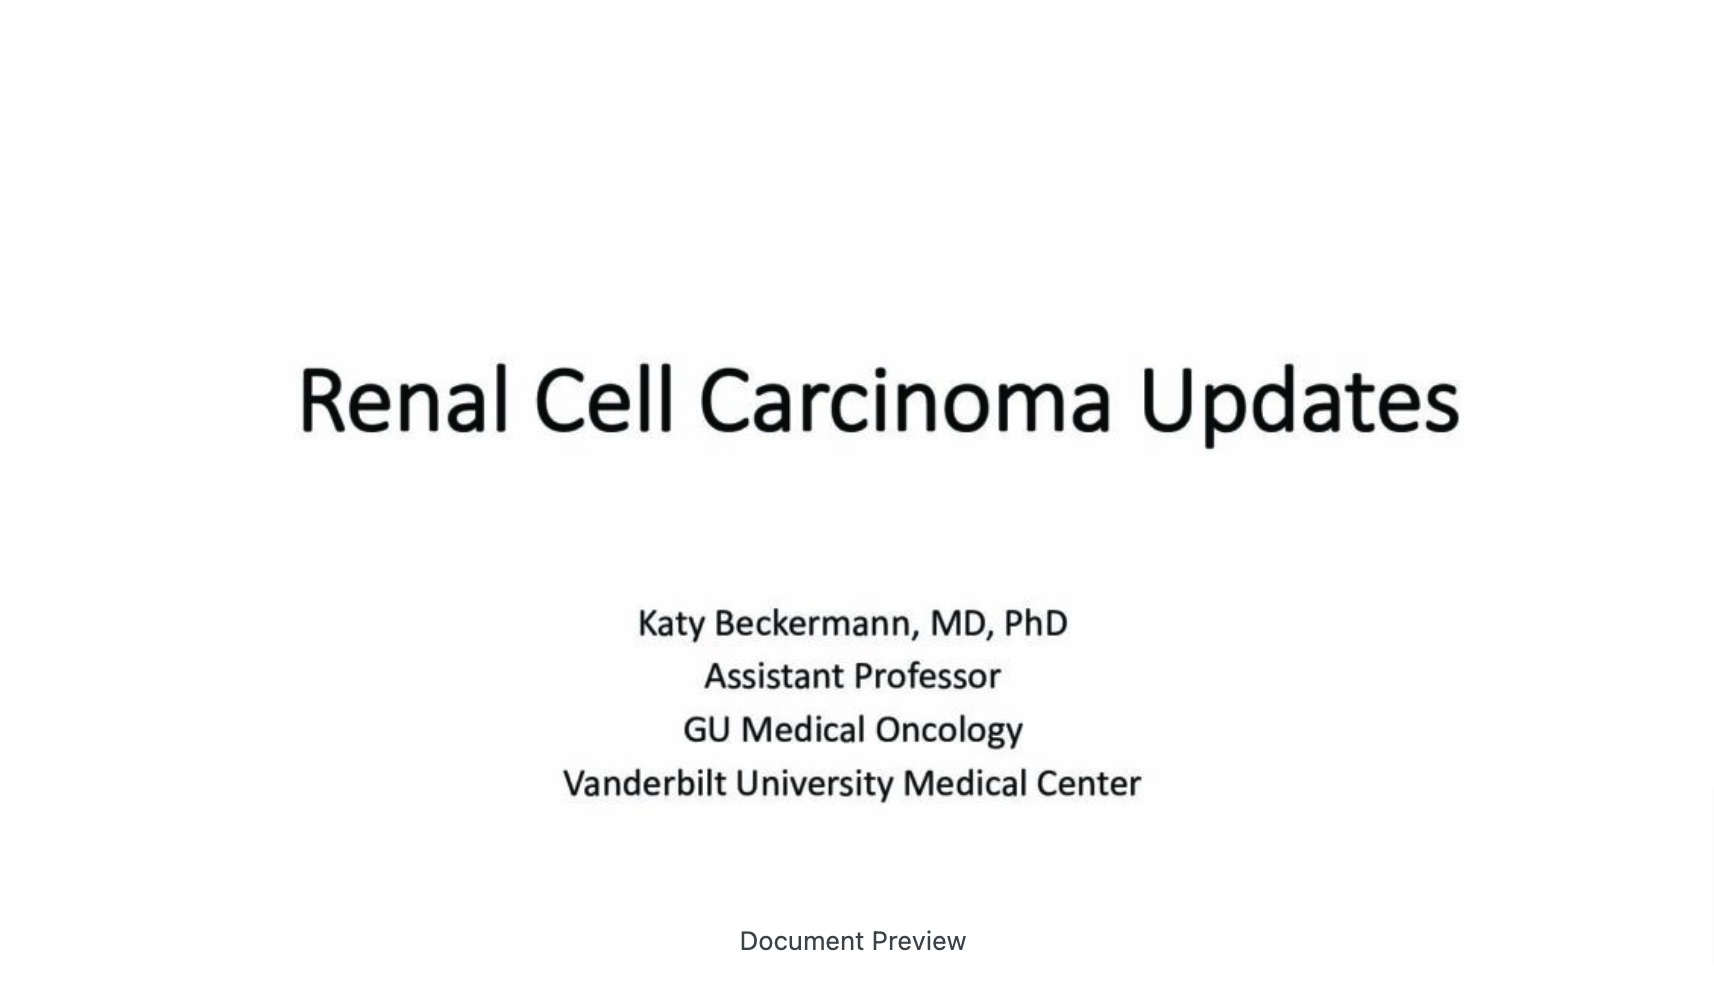 Renal Cell Cancer Update